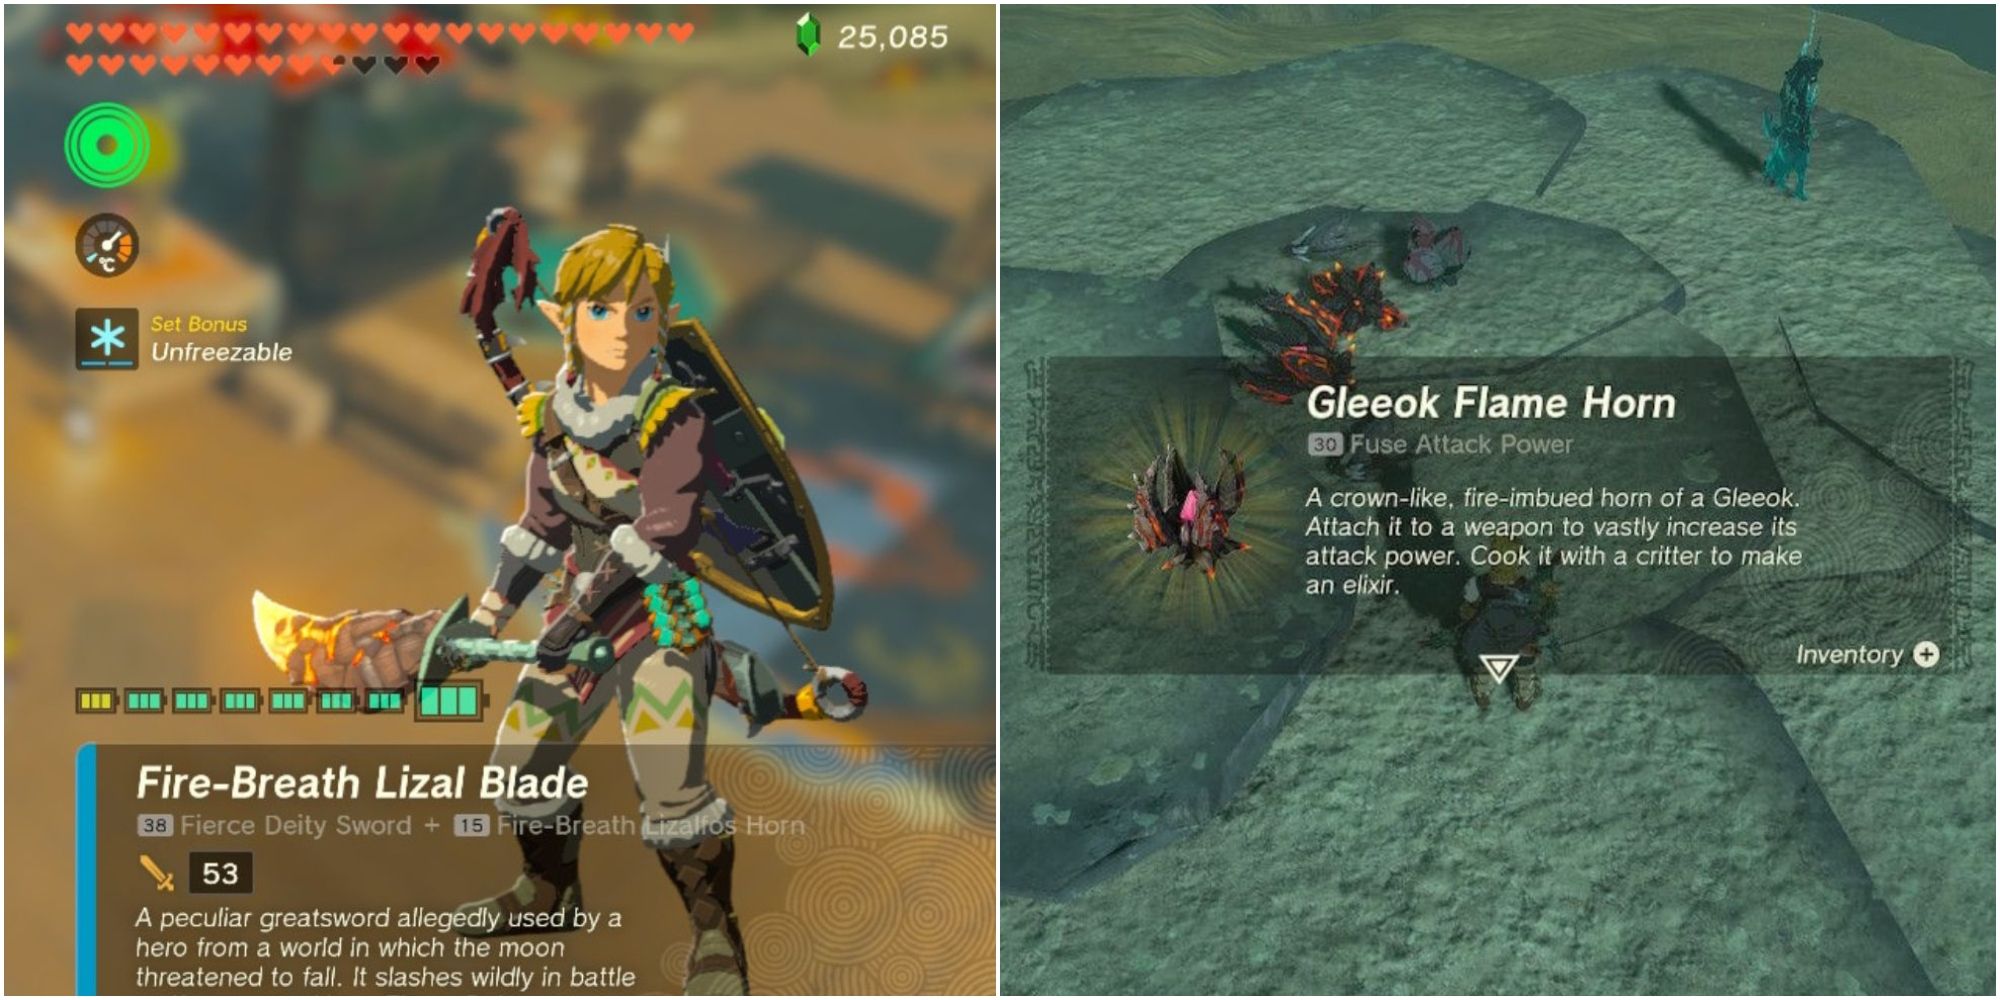 Link holding a fire-breath lizal blade next to an image of Gleeok Flame Horn